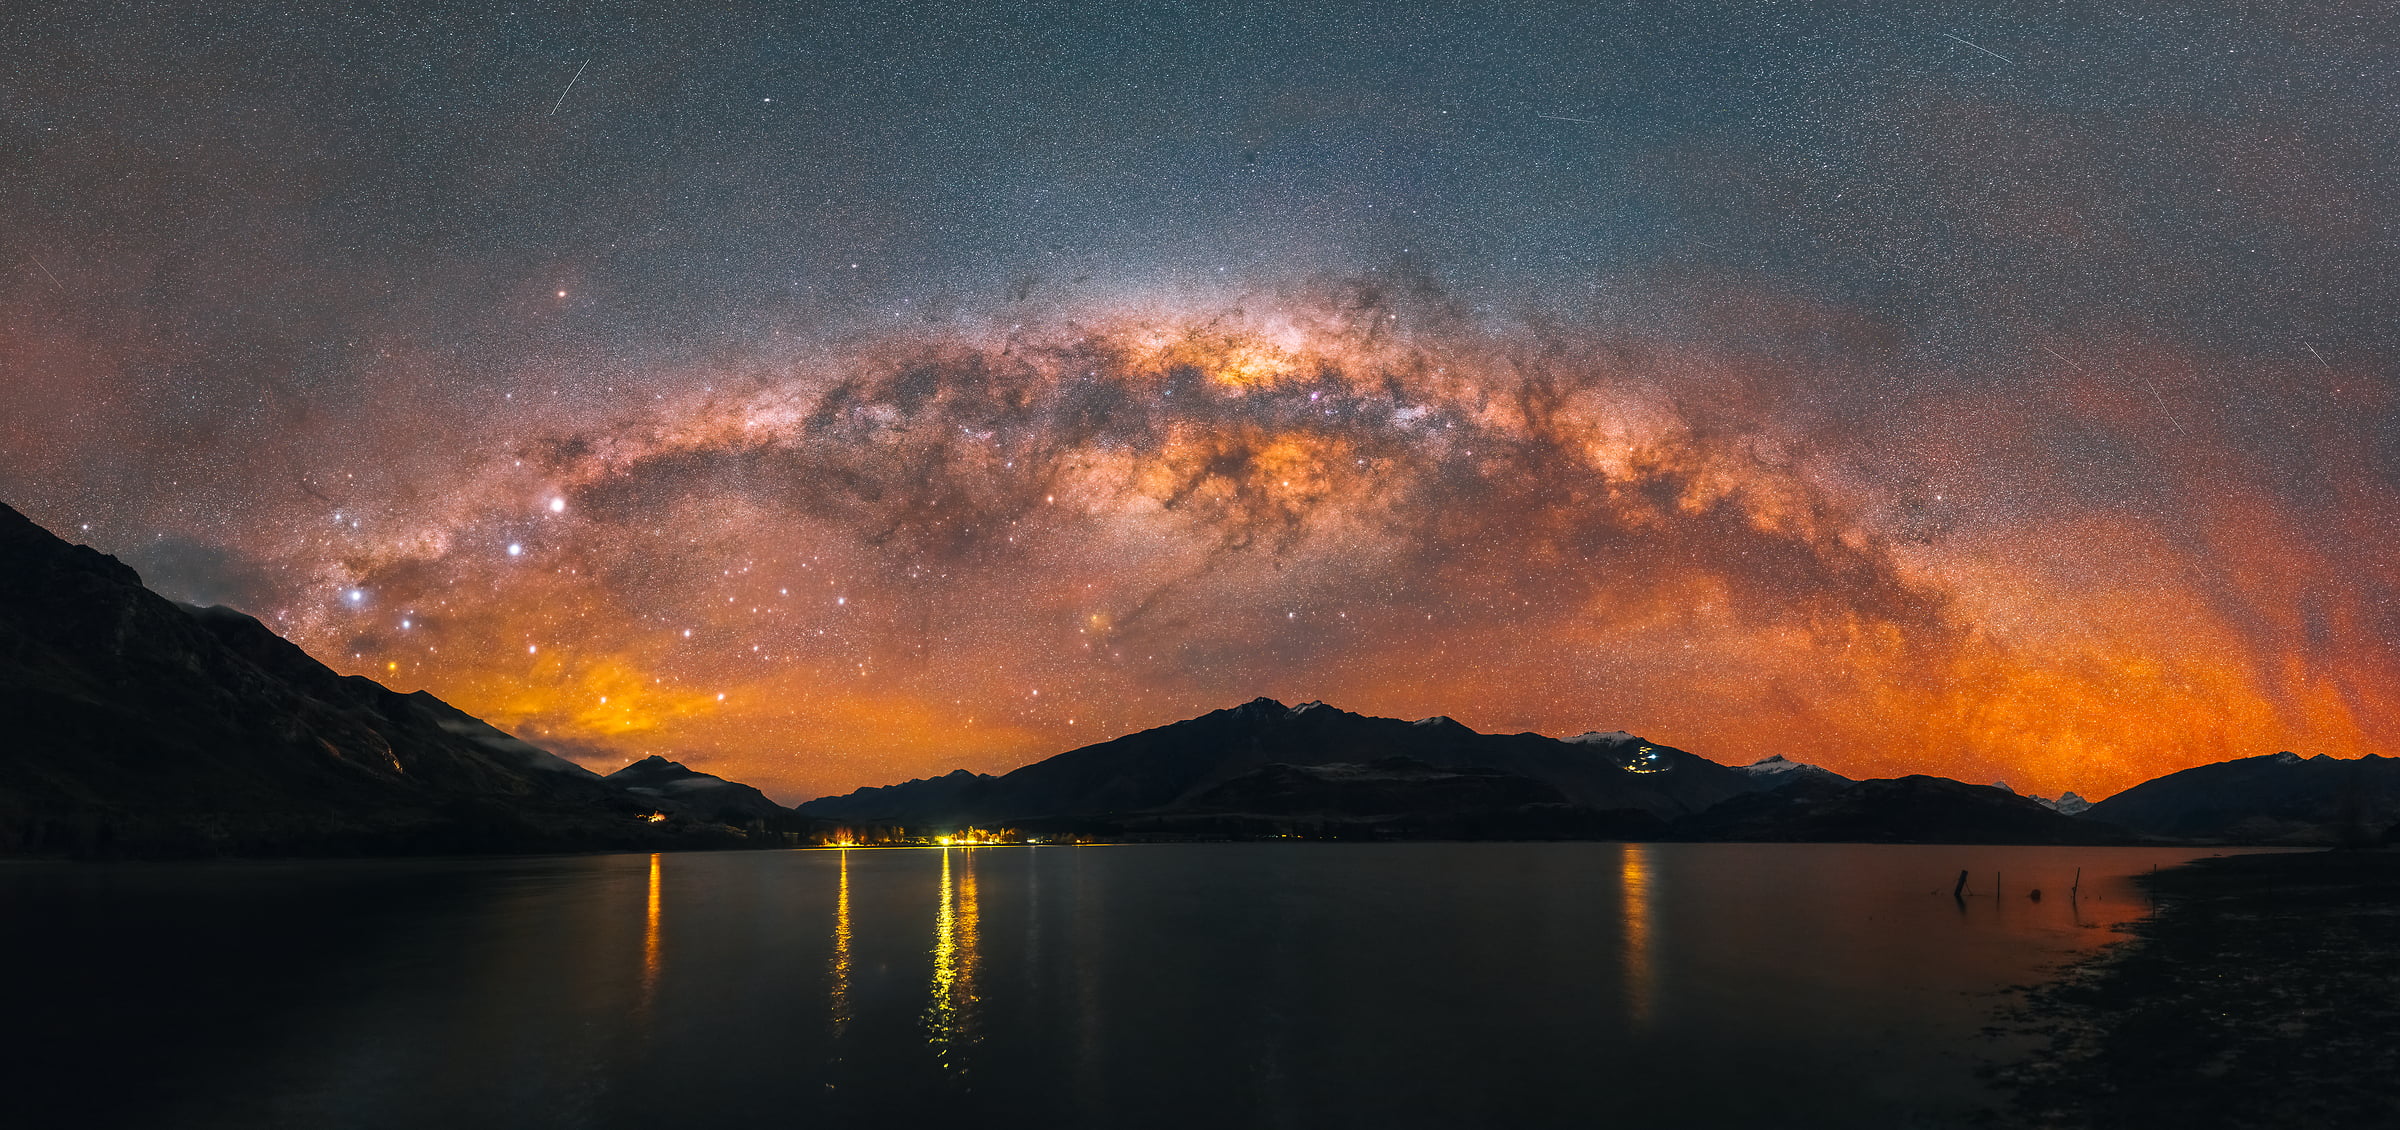 297 megapixels! A very high resolution, large-format VAST photo print of the night sky, milky way, and stars over mountains and a lake; fine art astrophotography landscape photo created by Paul Wilson in Lake Wanaka, New Zealand.